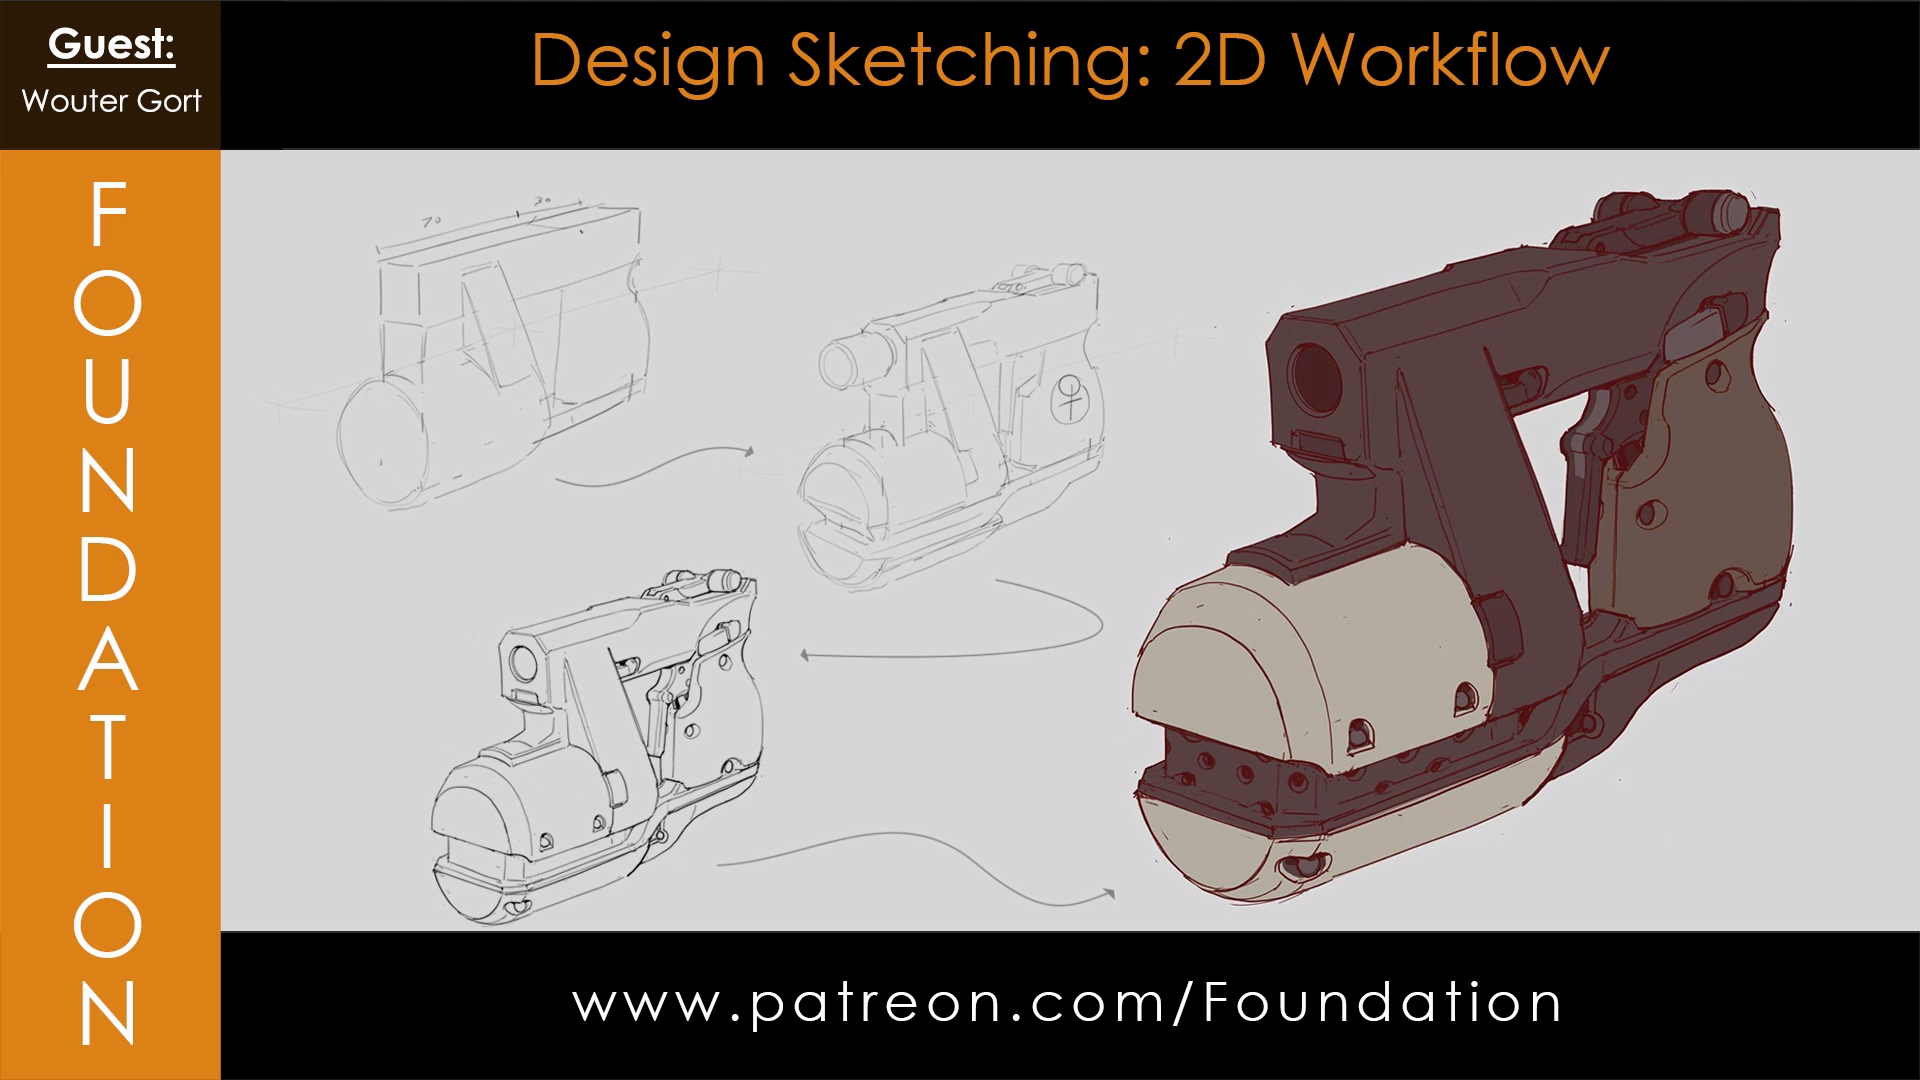 Design Sketching – 2D Workflow with Wouter Gort